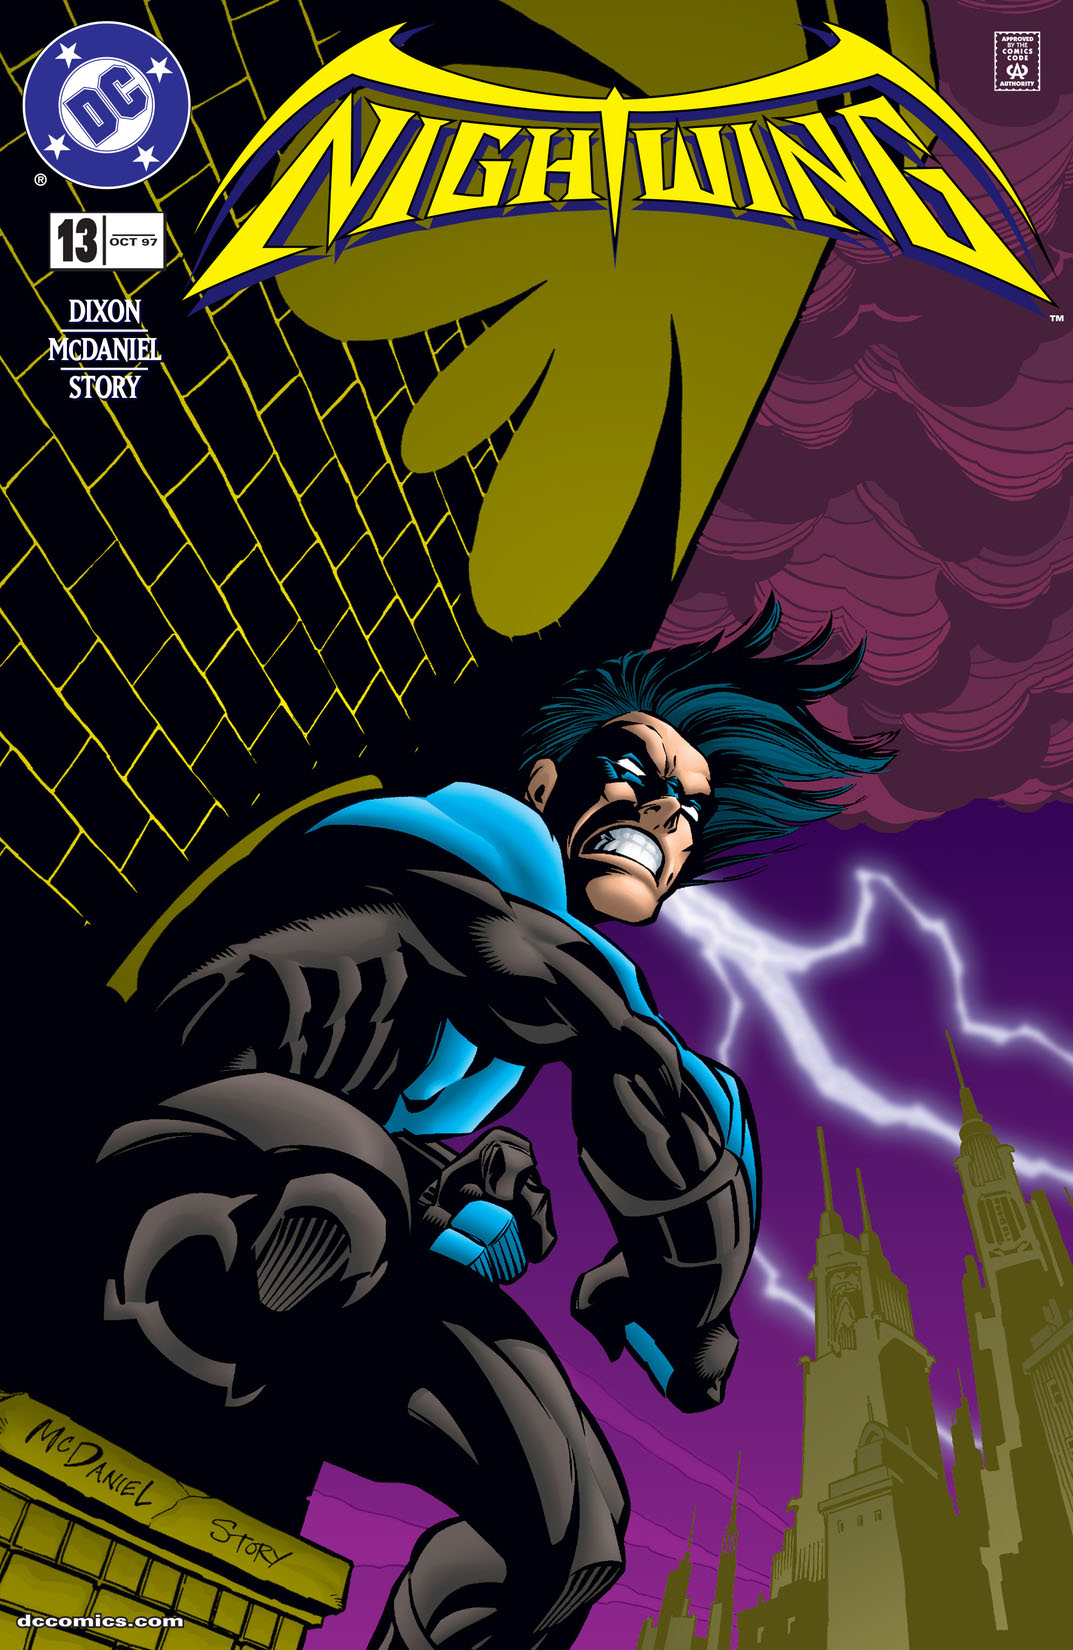 Nightwing (1996-) #13 preview images